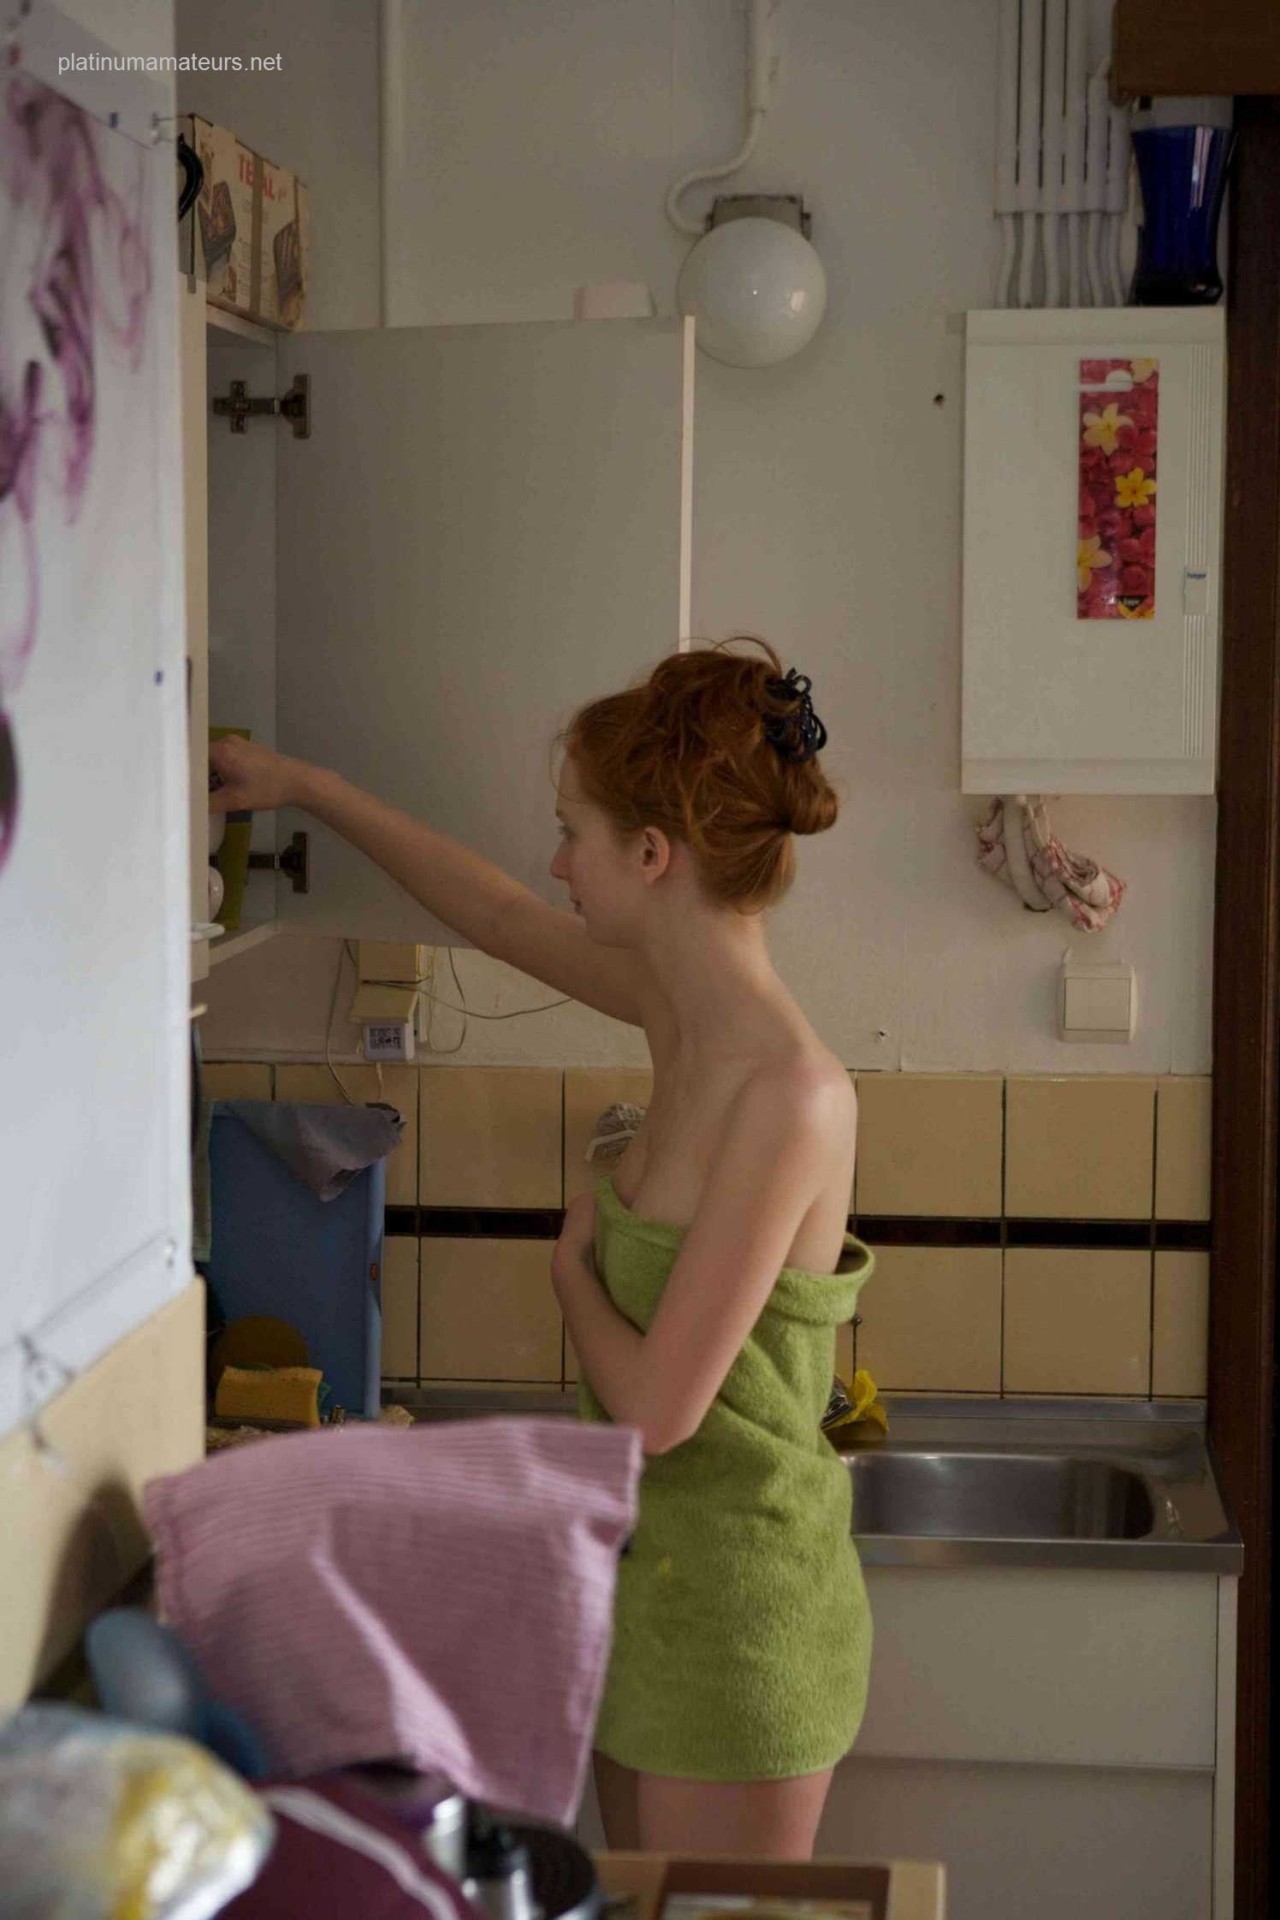 Adelle / Juliette, my longtime mystery redhead, getting ready in the morning.